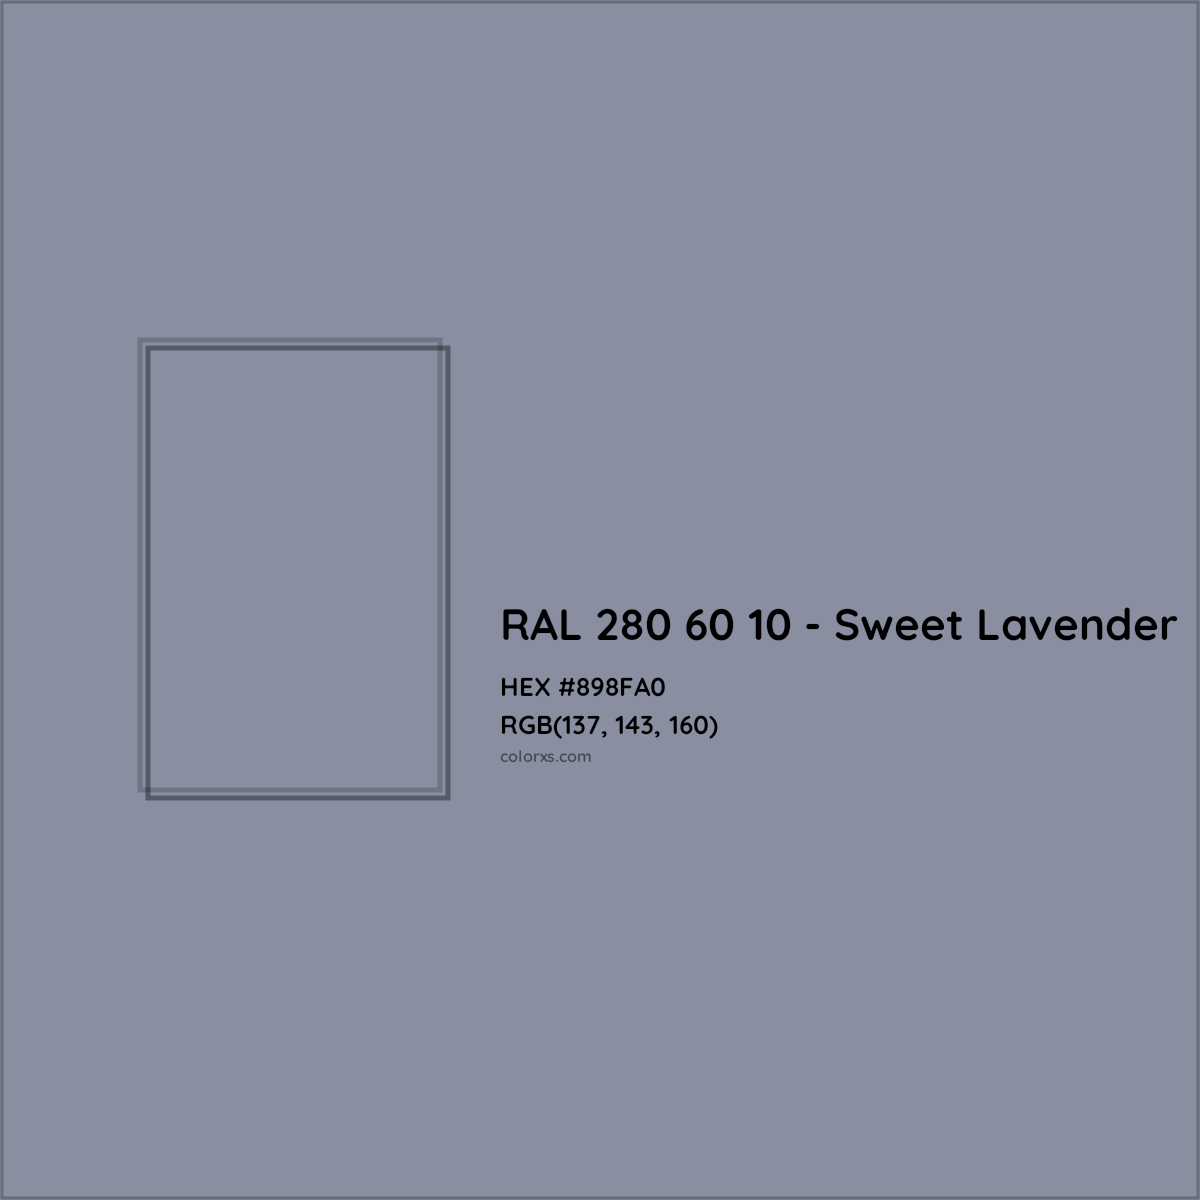 HEX #898FA0 RAL 280 60 10 - Sweet Lavender CMS RAL Design - Color Code